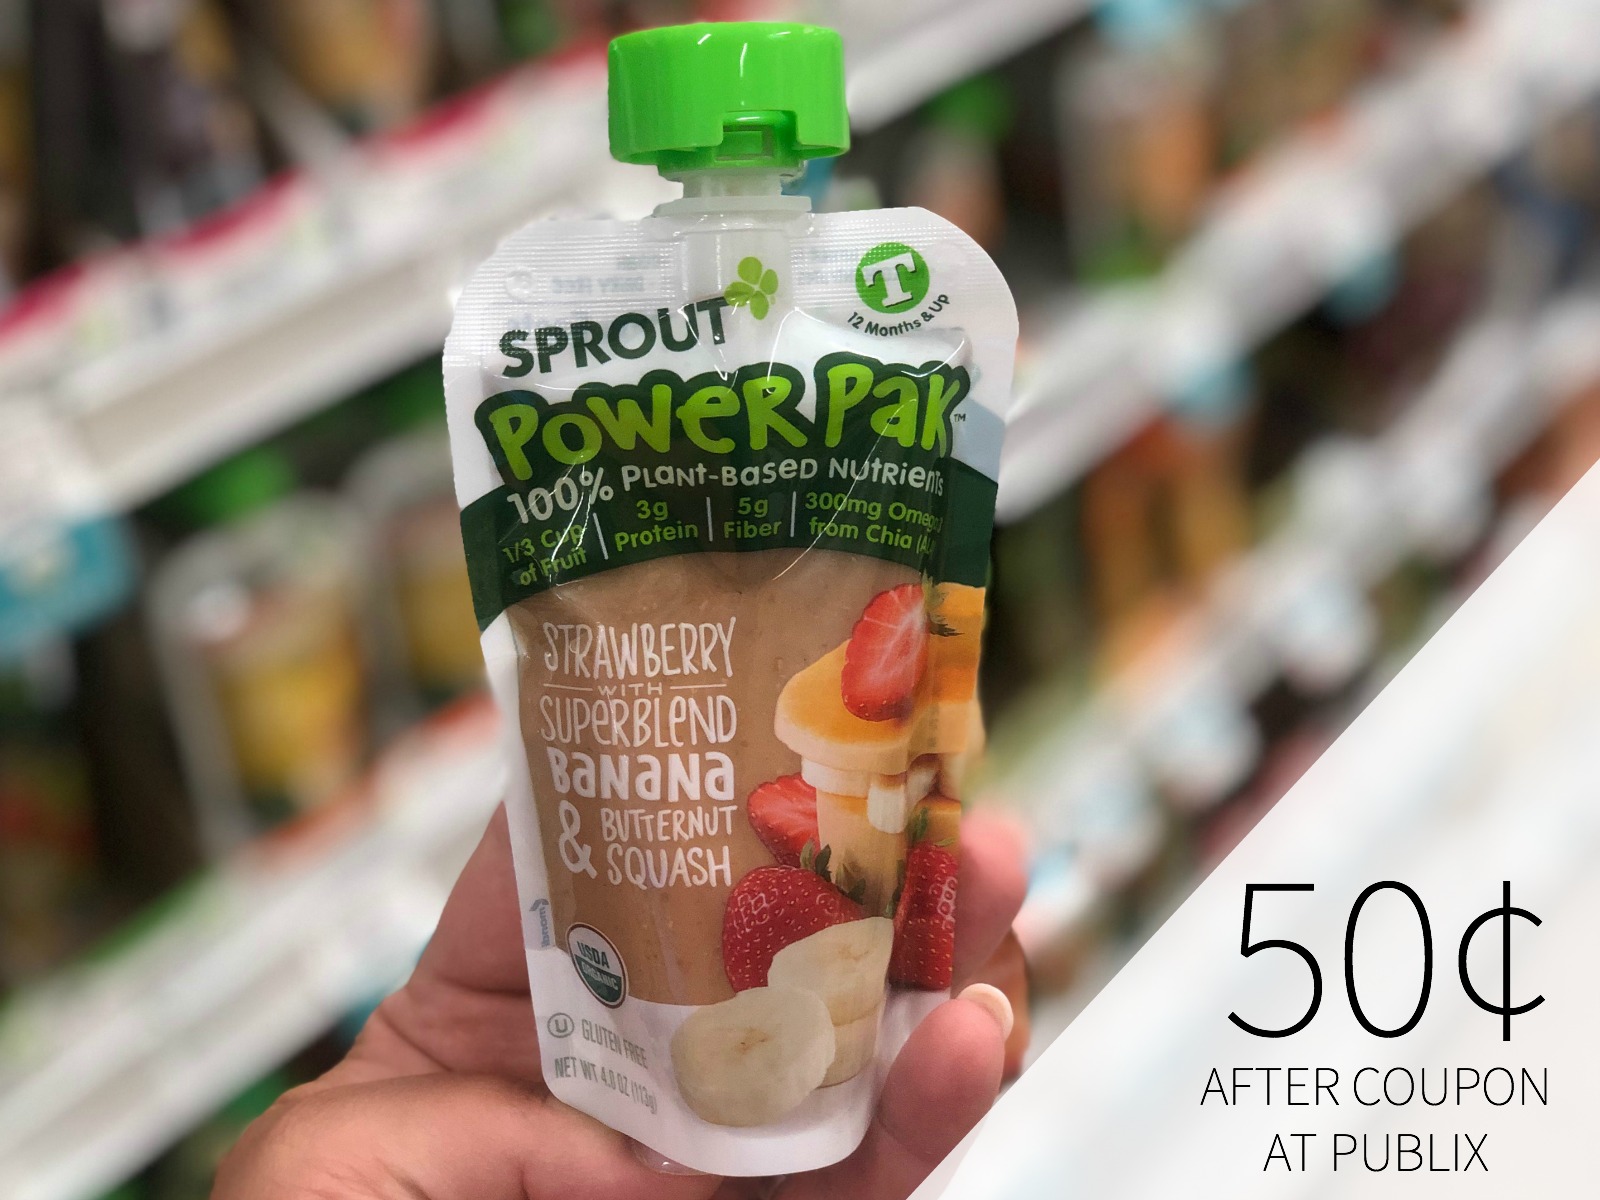 Stock Up On Sprout Pouches And Snacks This Week At Publix – Fantastic Deal On Plant Powered Goodness!